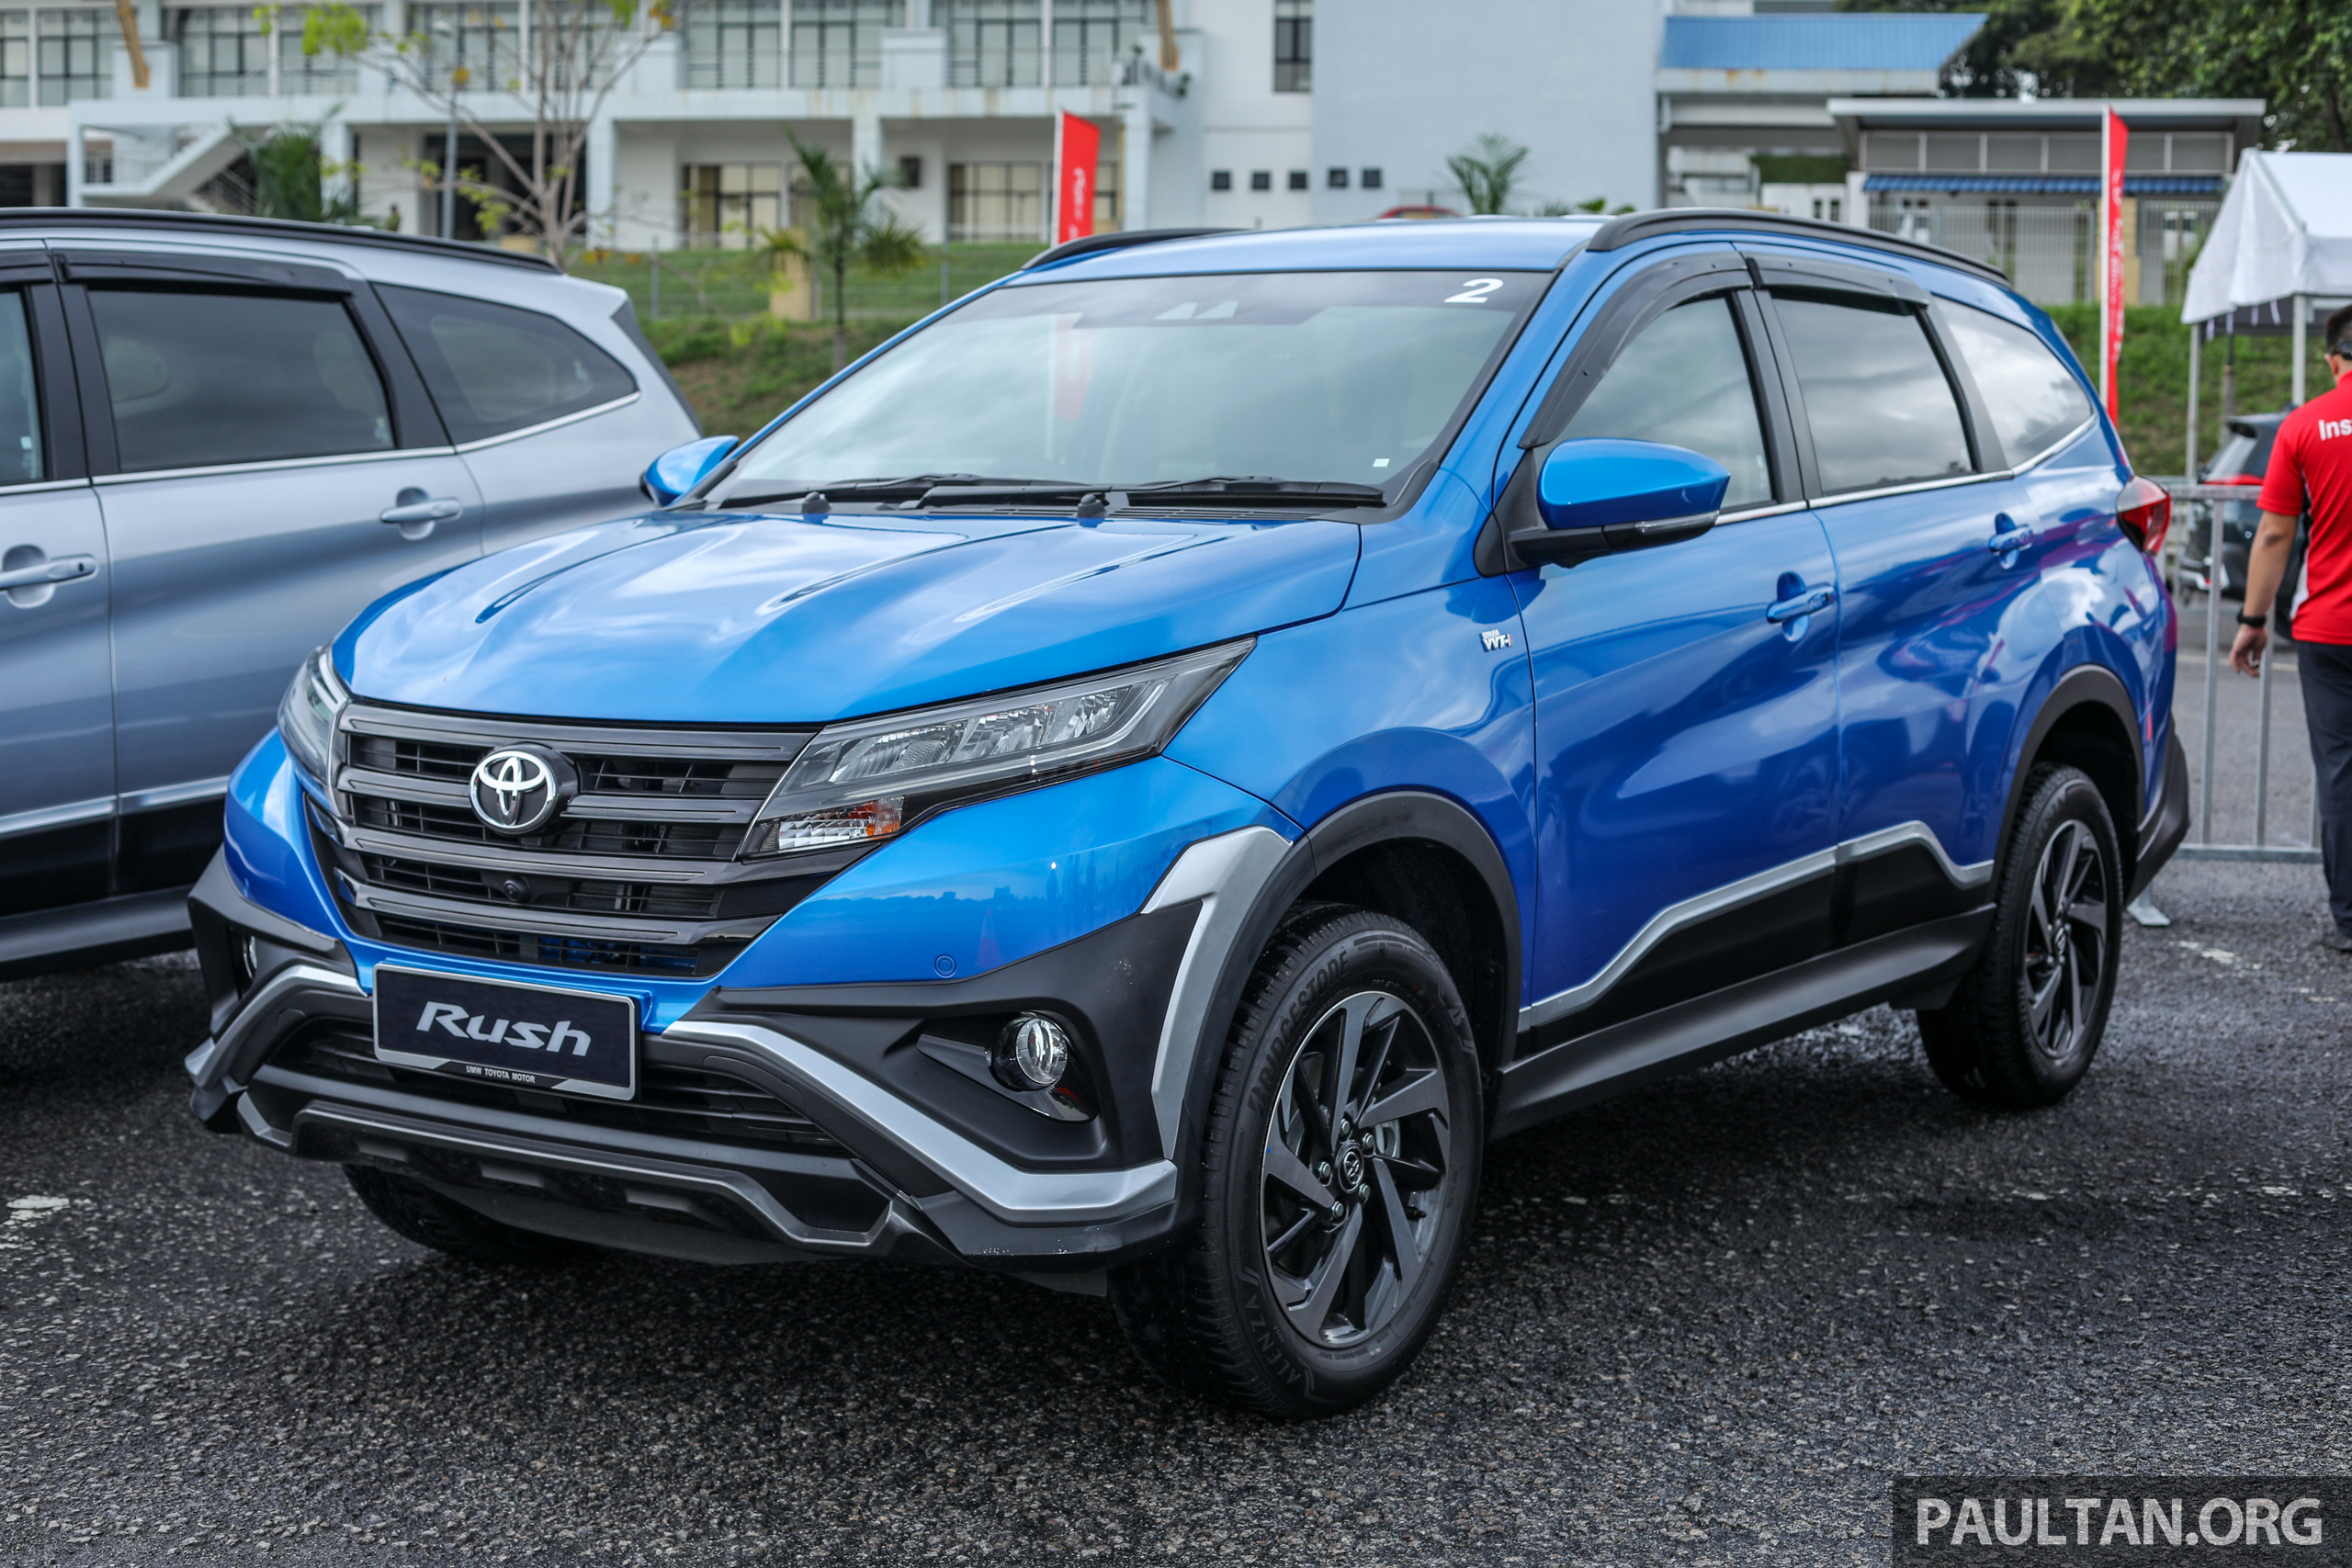 2018 Toyota Rush launched in Malaysia – new 1.5L engine, PreCollision